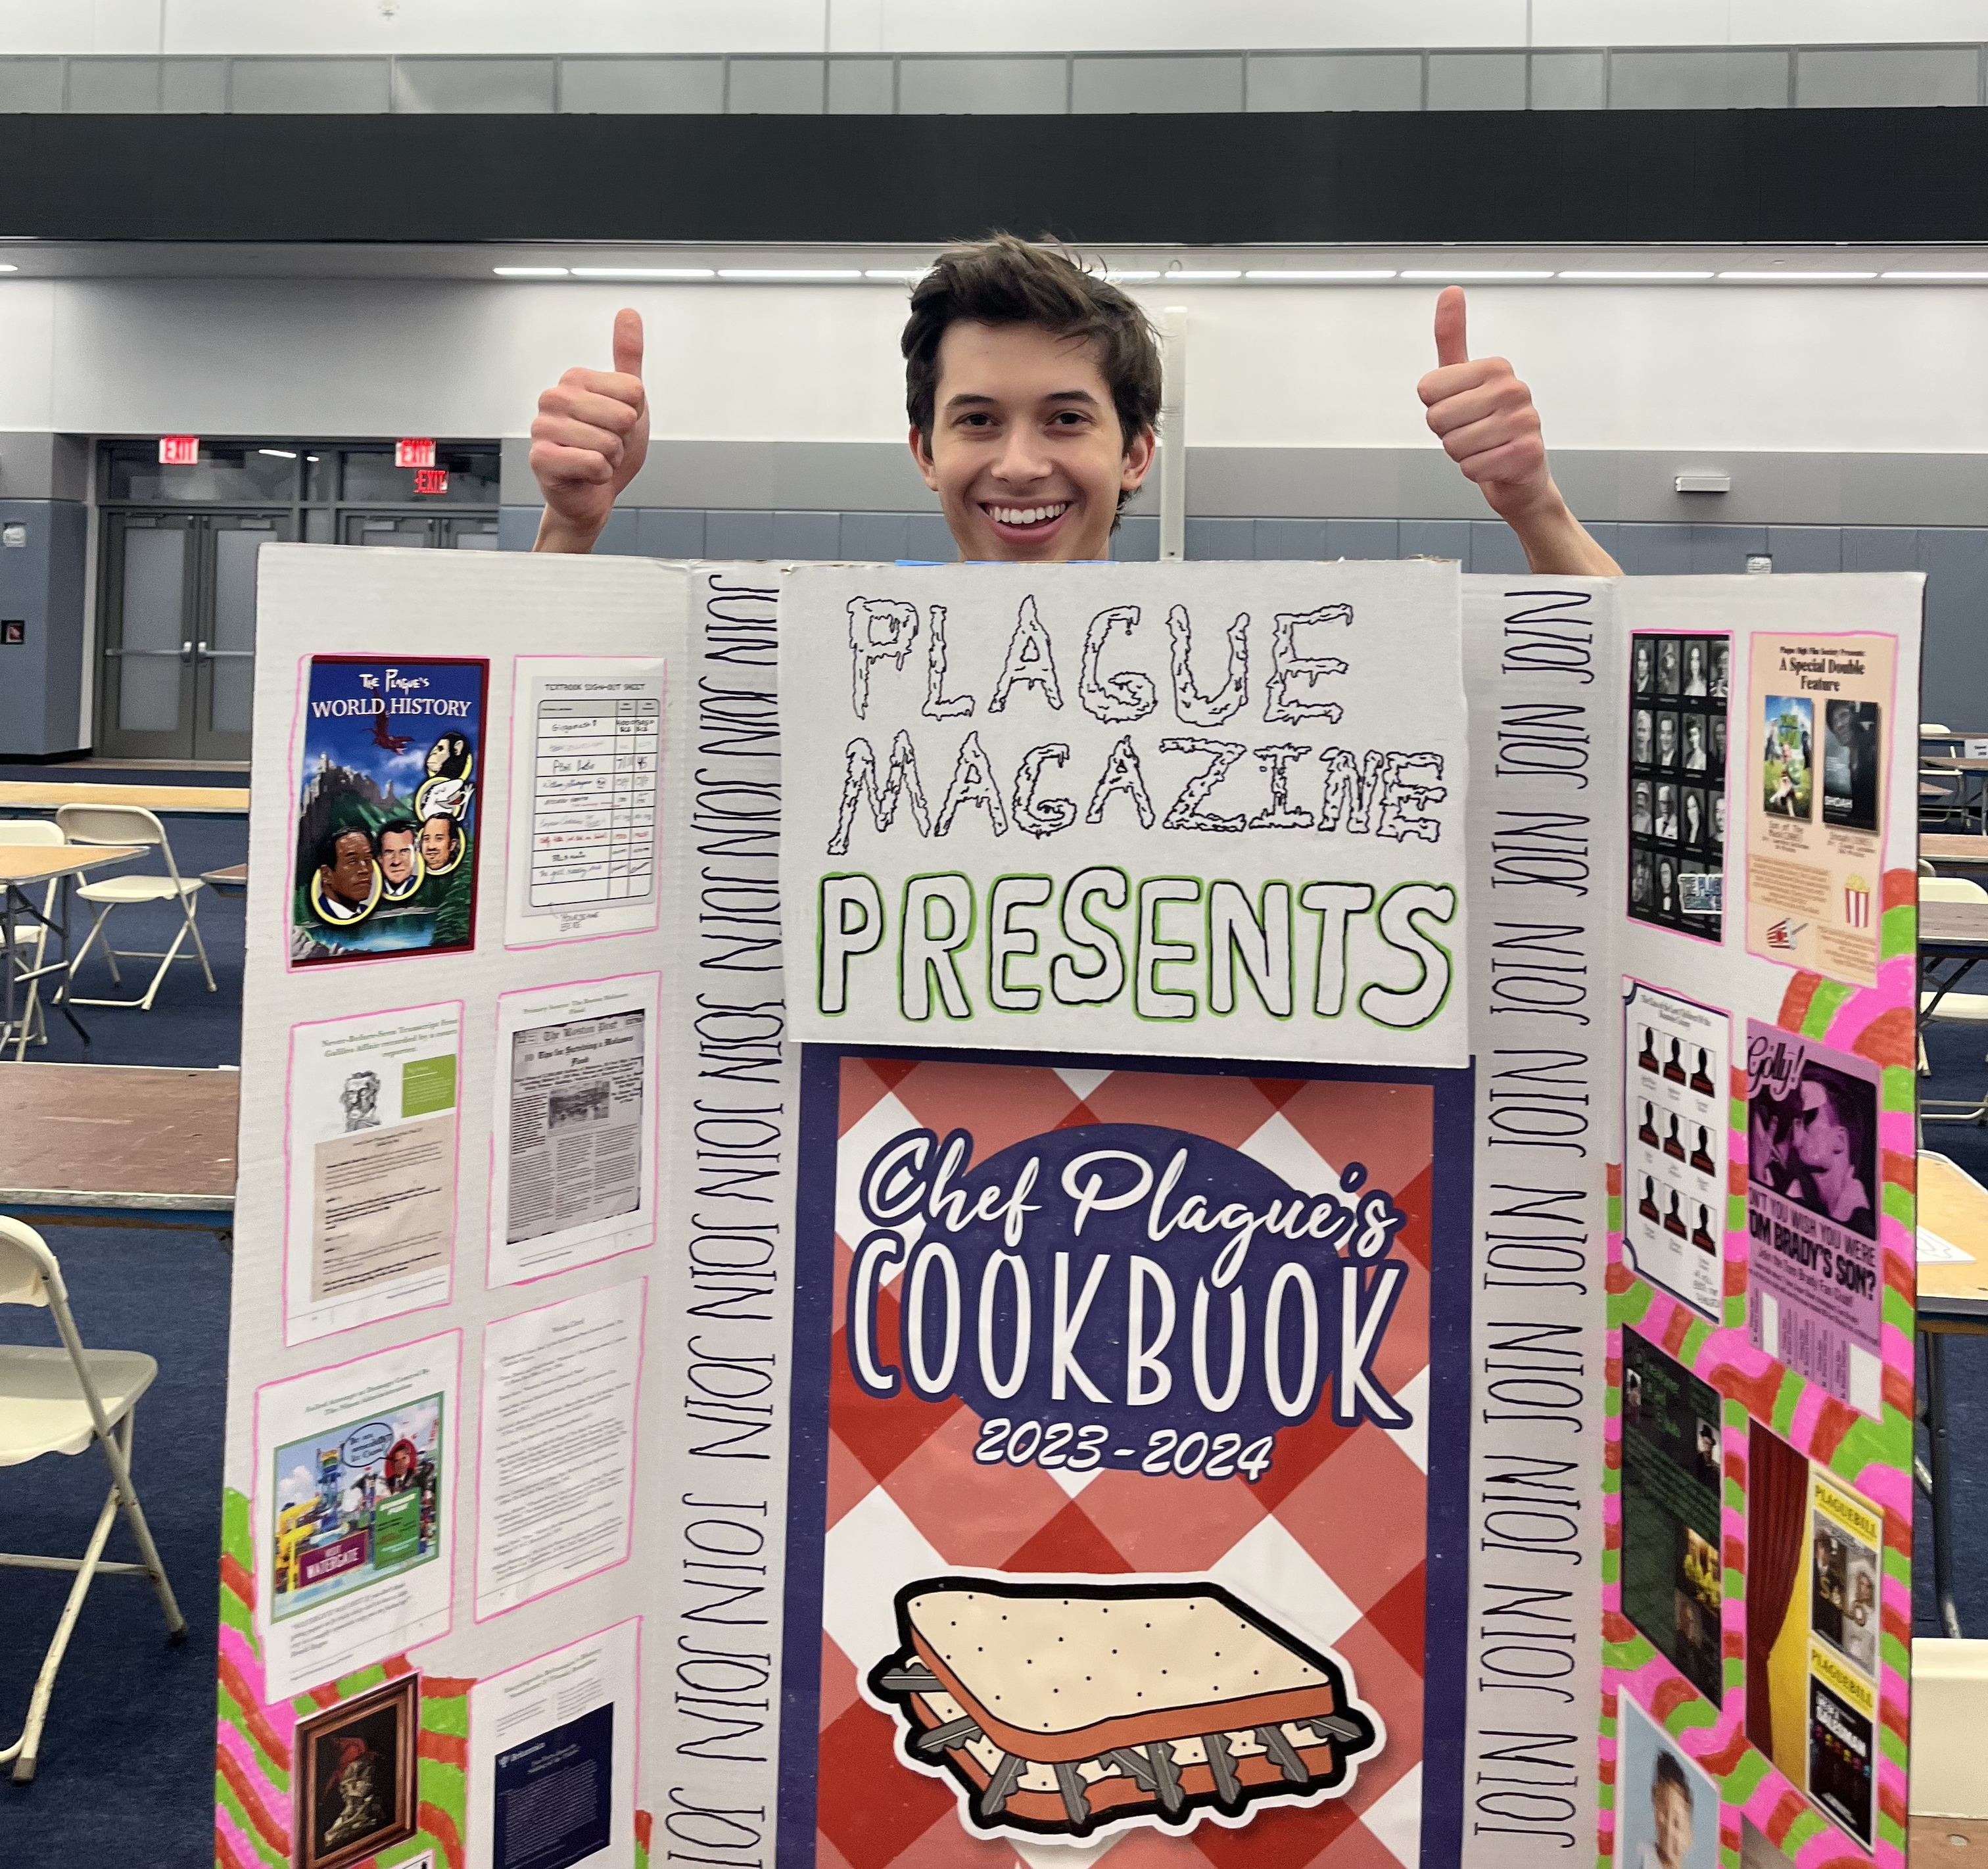 The author, a male-presenting NYU student, stands behind a trifold poster promoting “The Plague,” NYU’s only intentionally funny student publication.